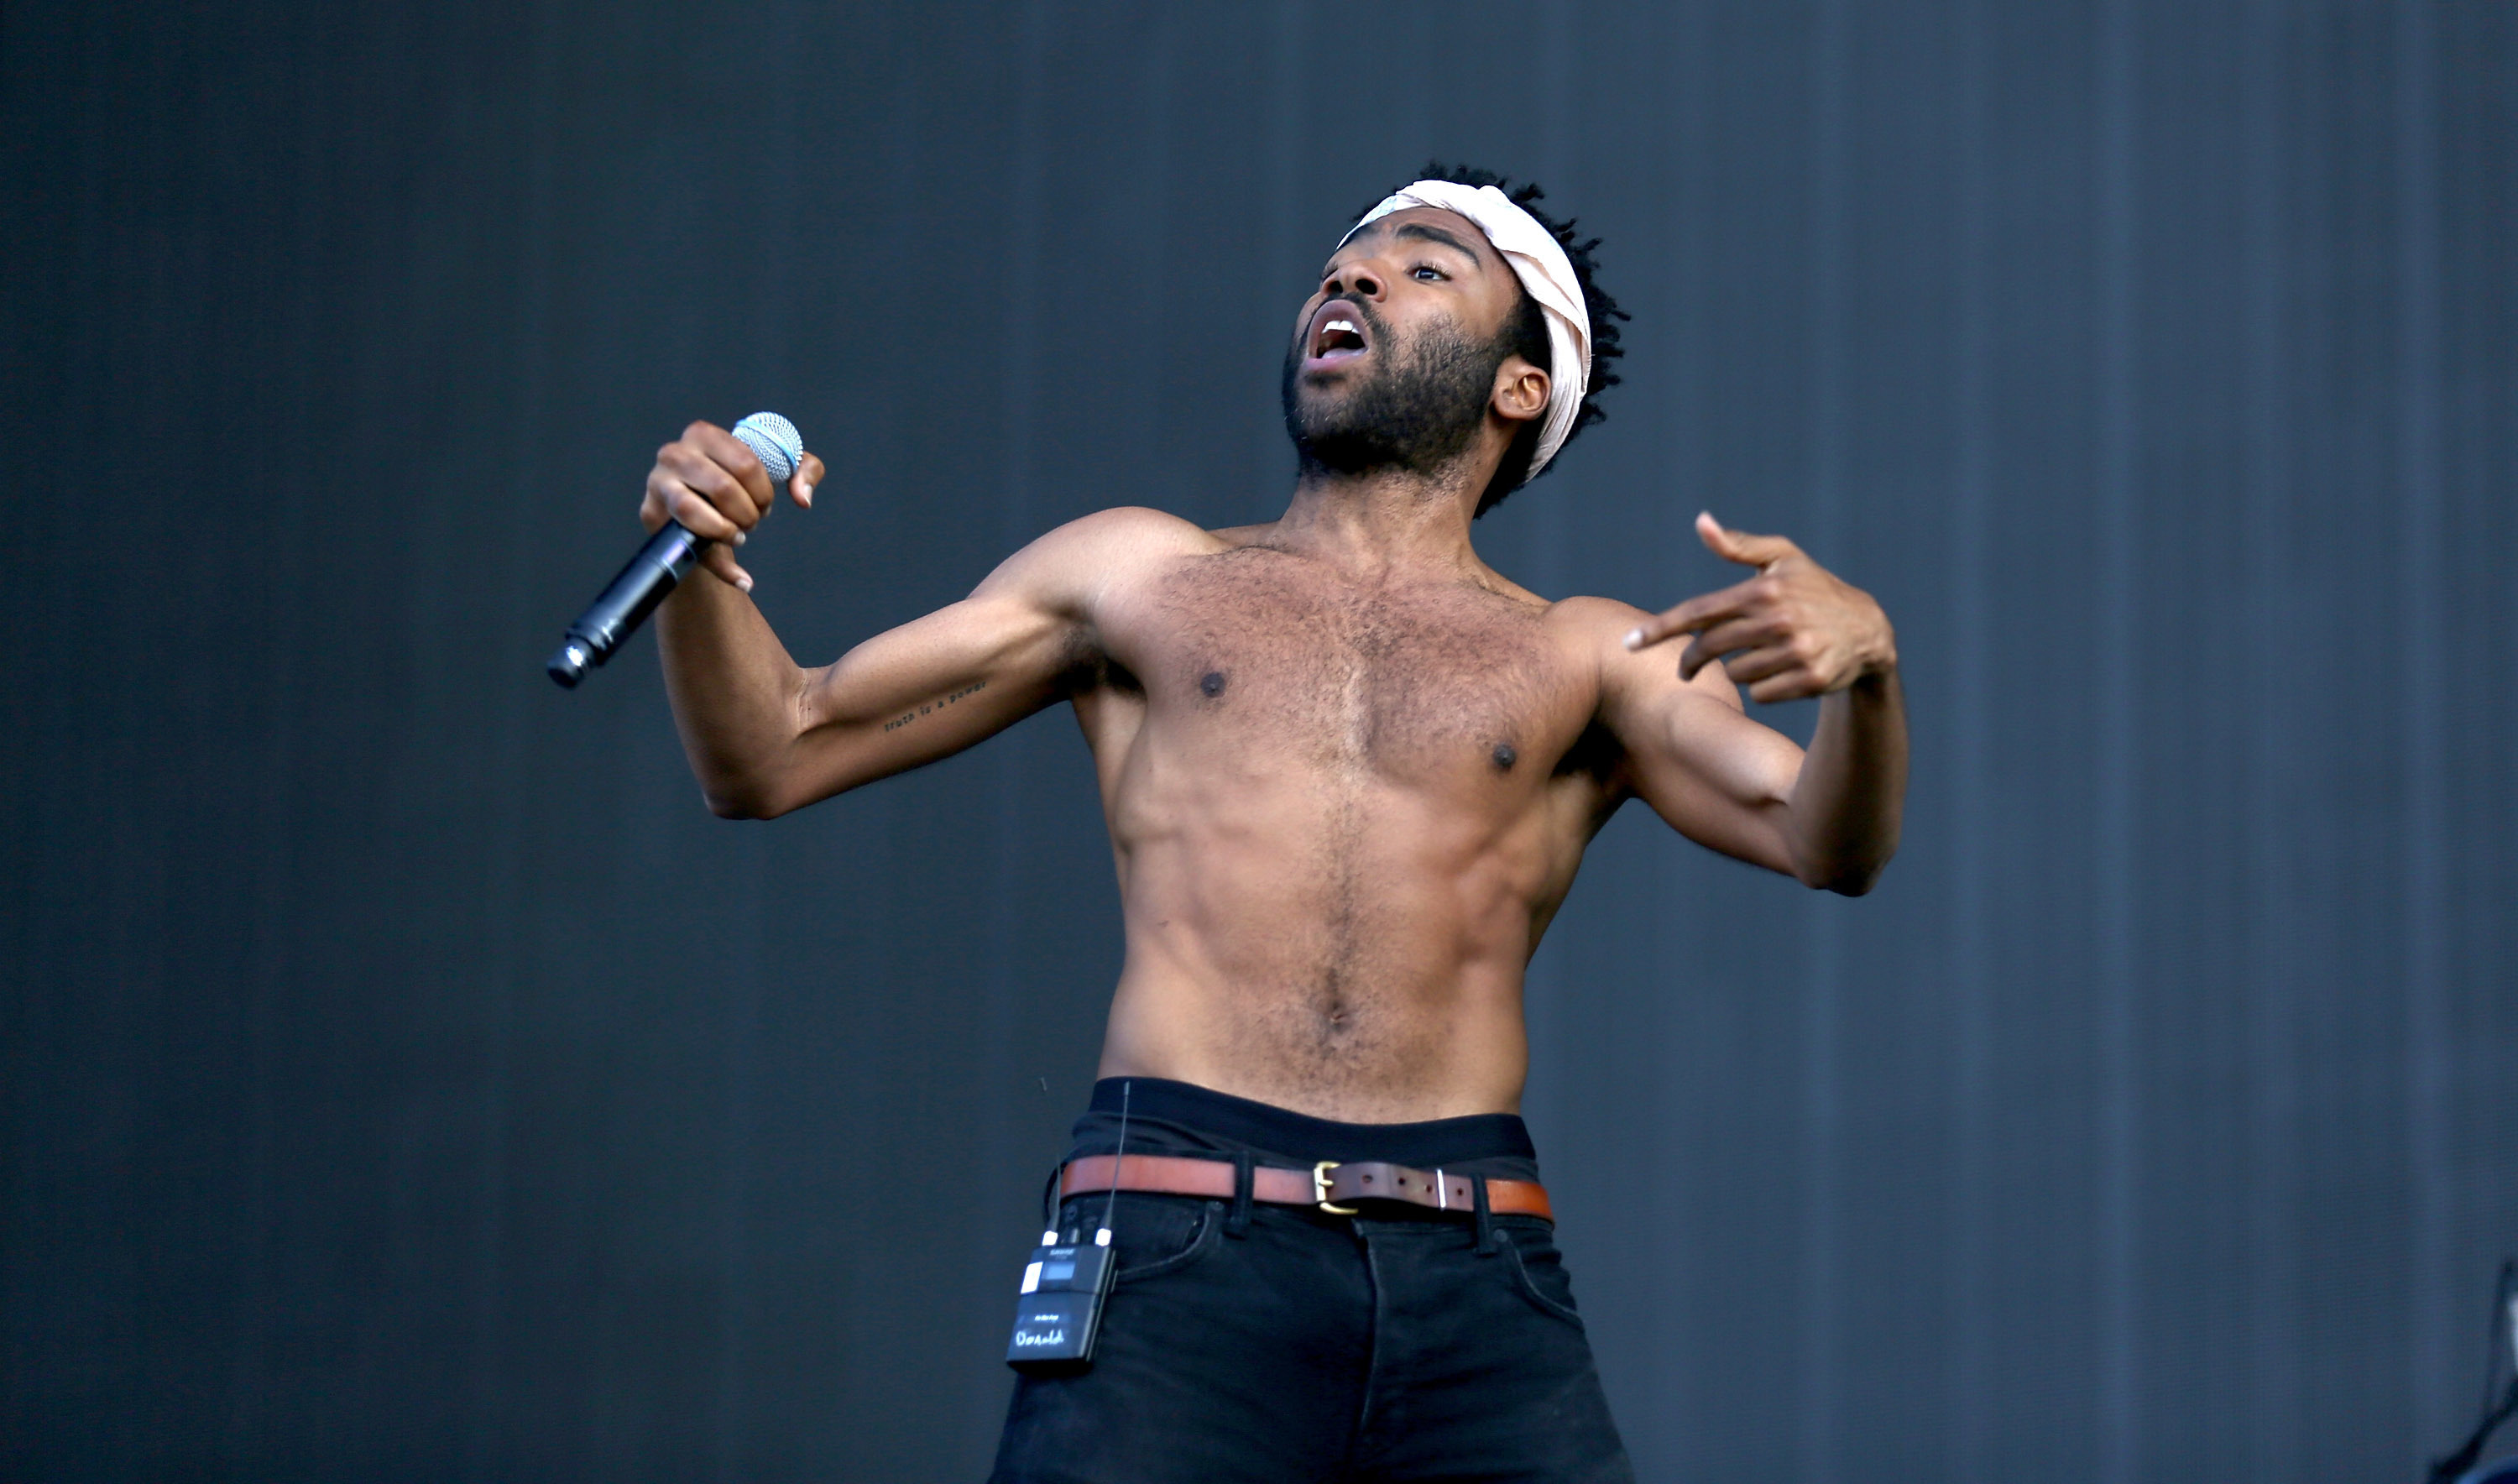 Childish Gambino Photo by Tim P. Whitby/Getty Images